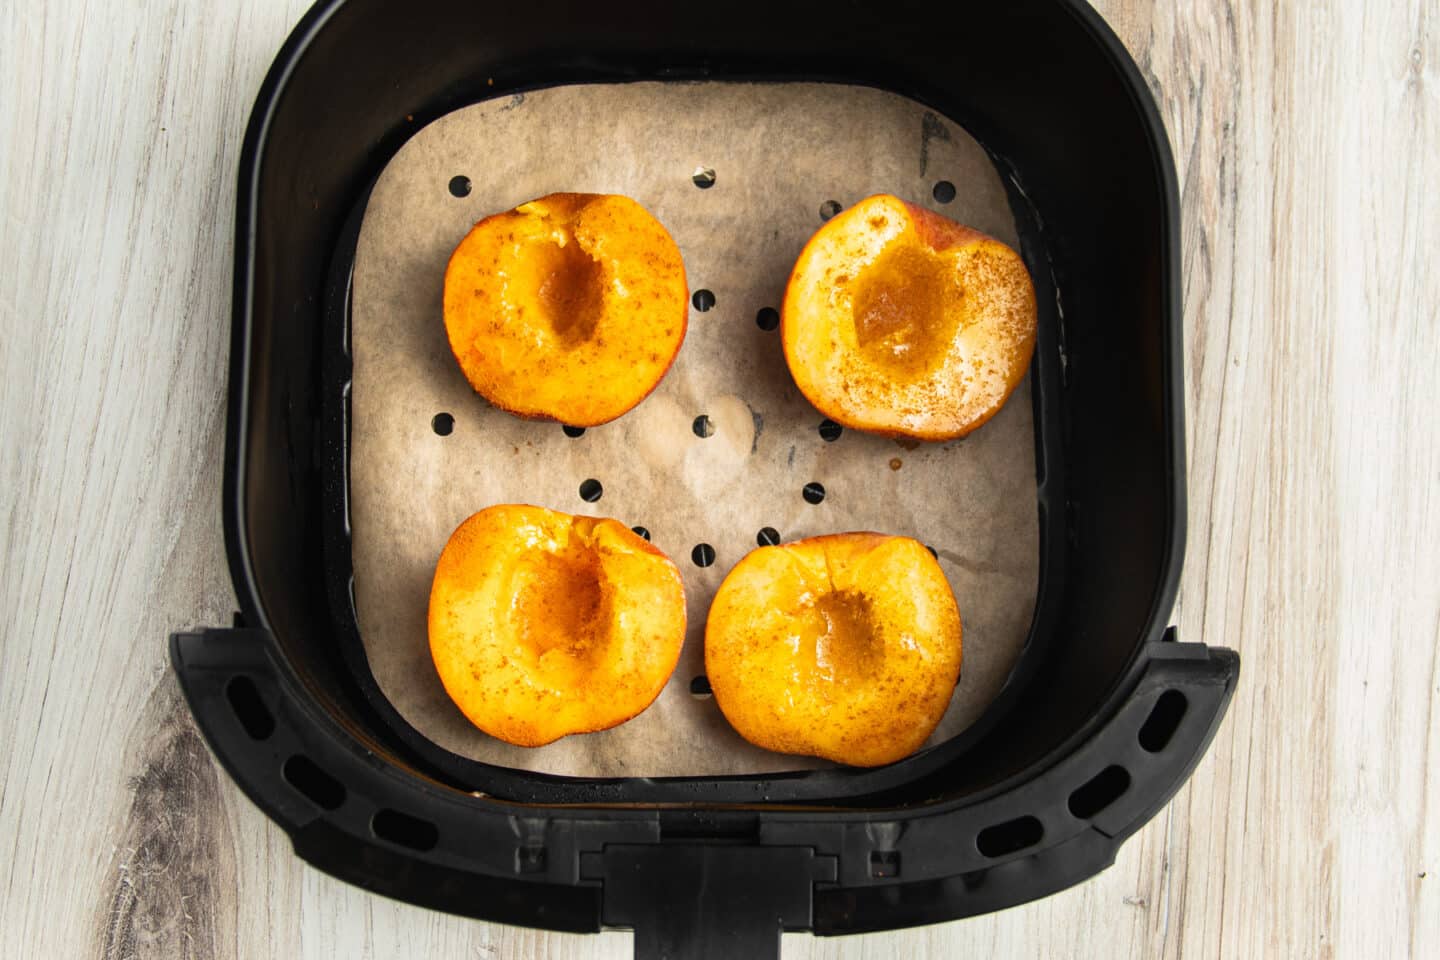 Picture of air fryer with parchment paper liner and peaches halves on top.